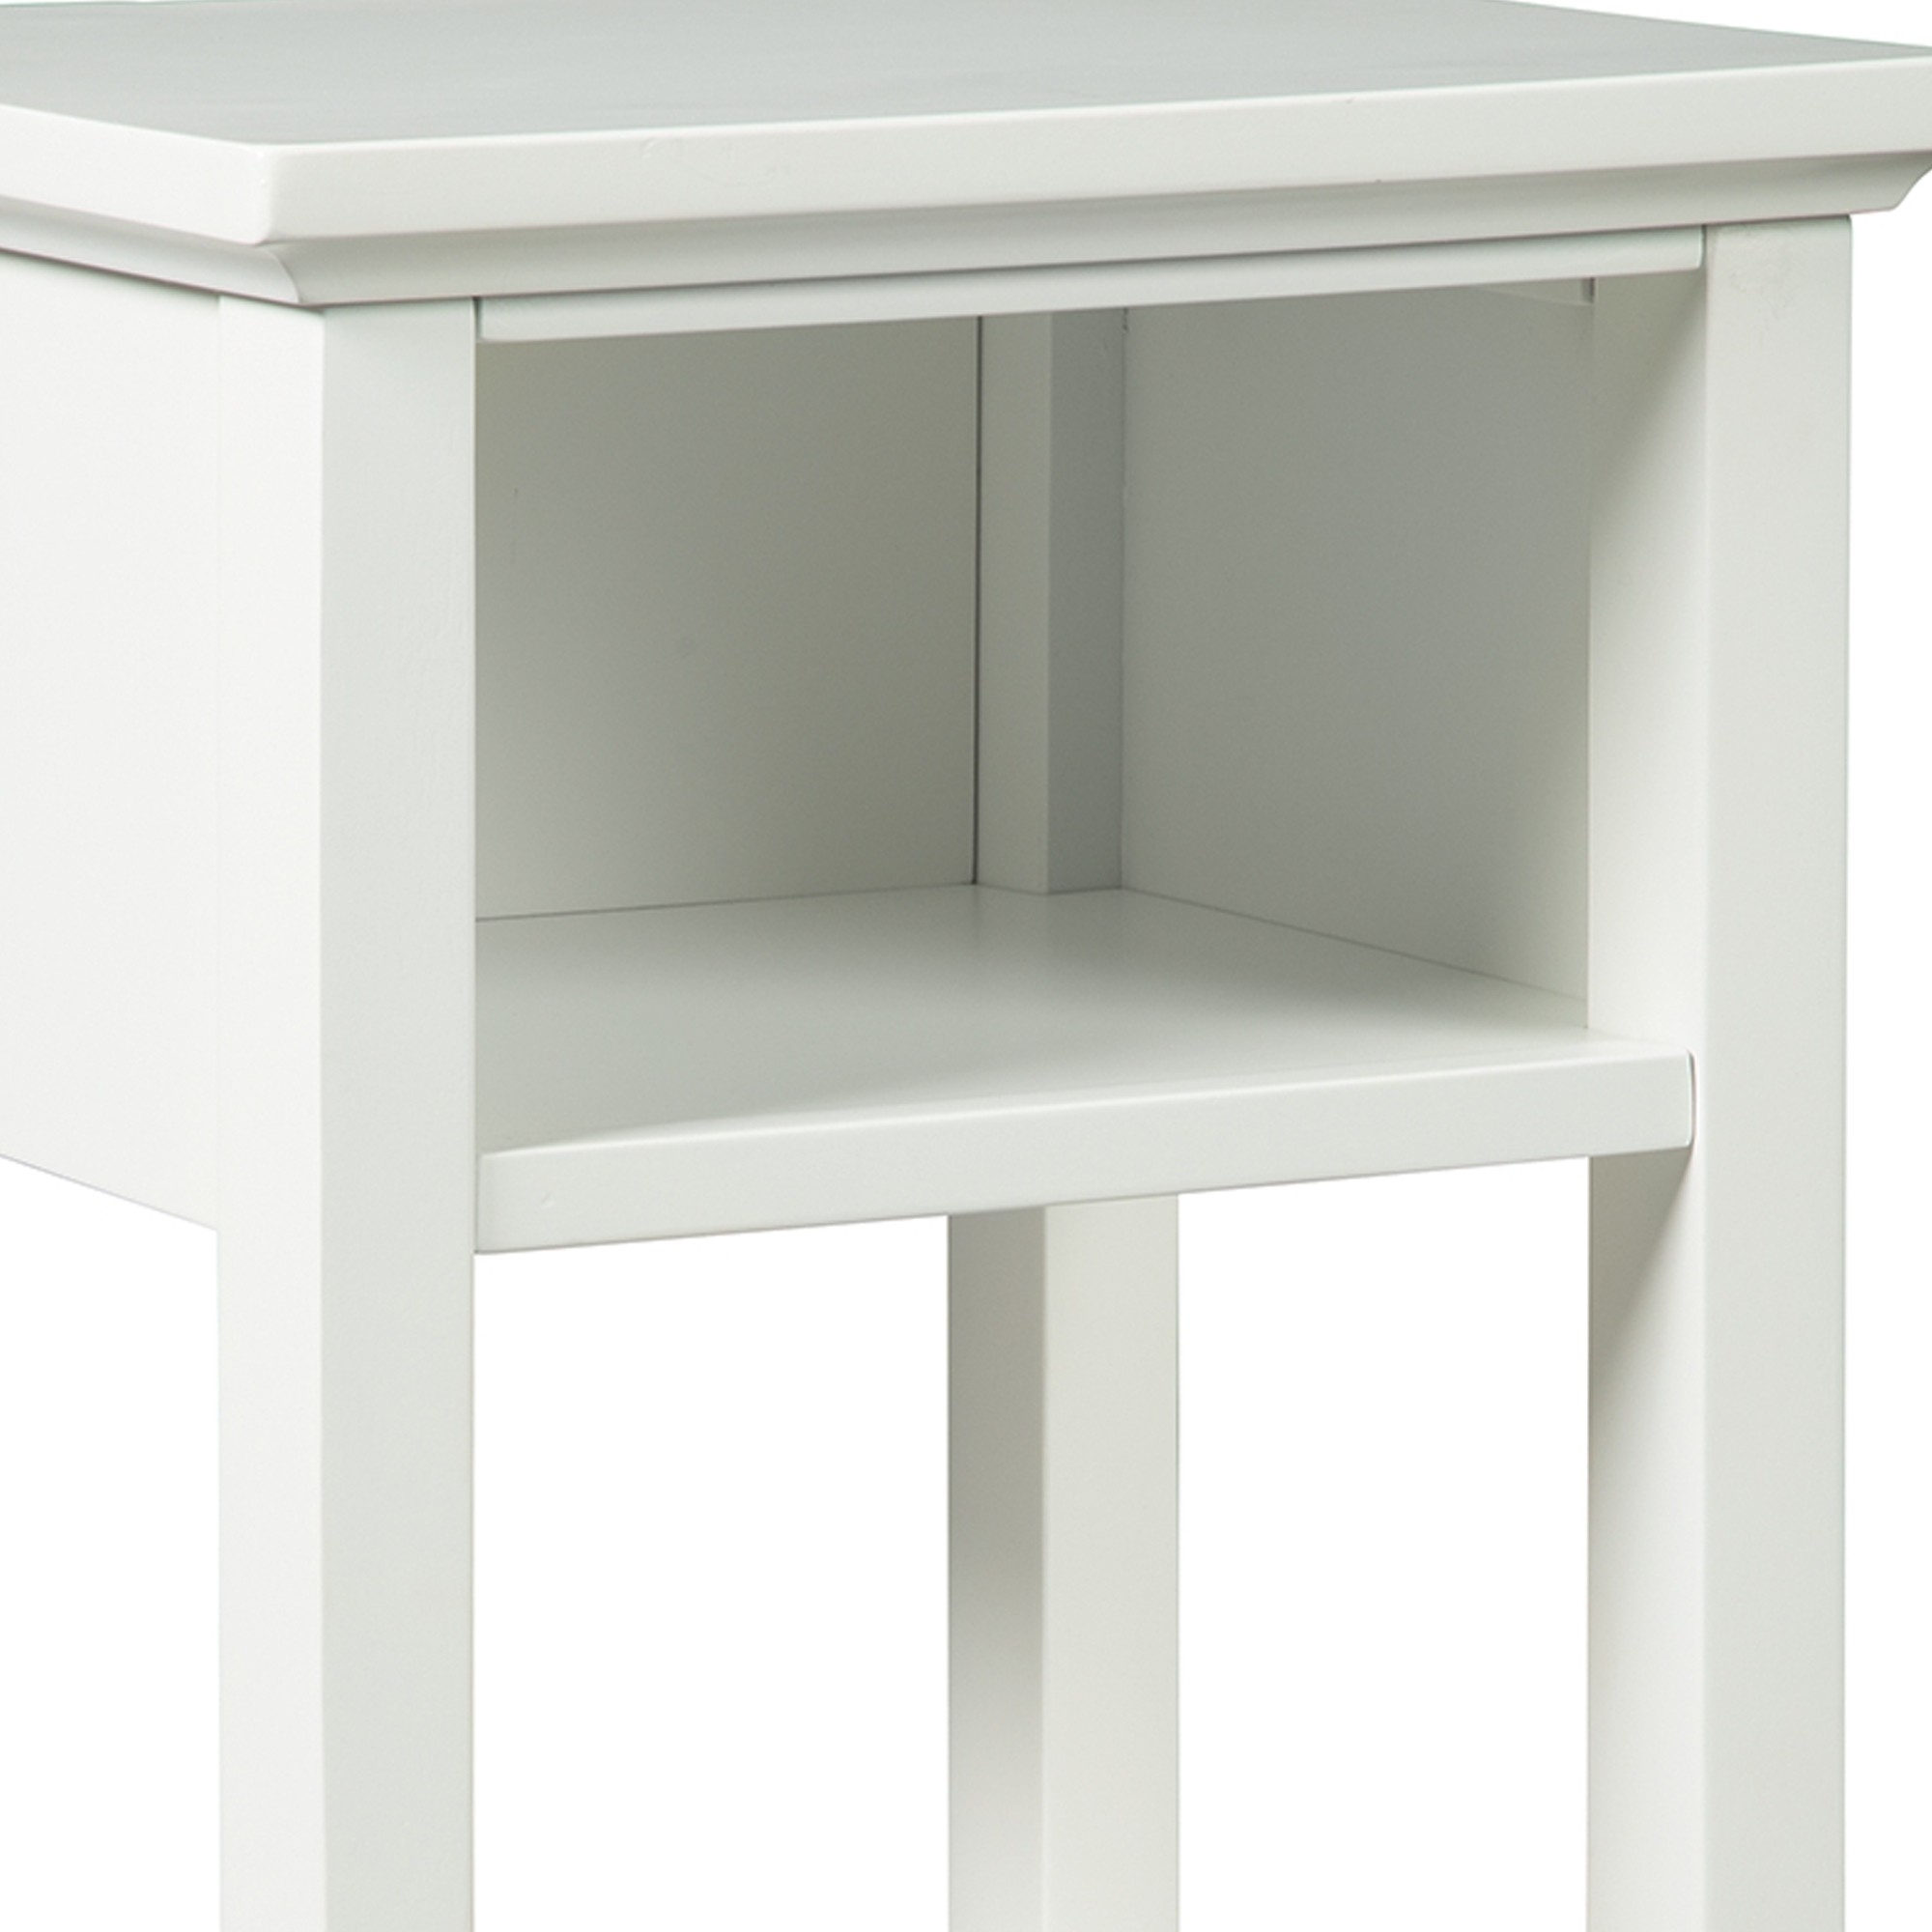 Square Wooden Accent Table With 2 USB Ports And Open Shelf, White- Saltoro Sherpi